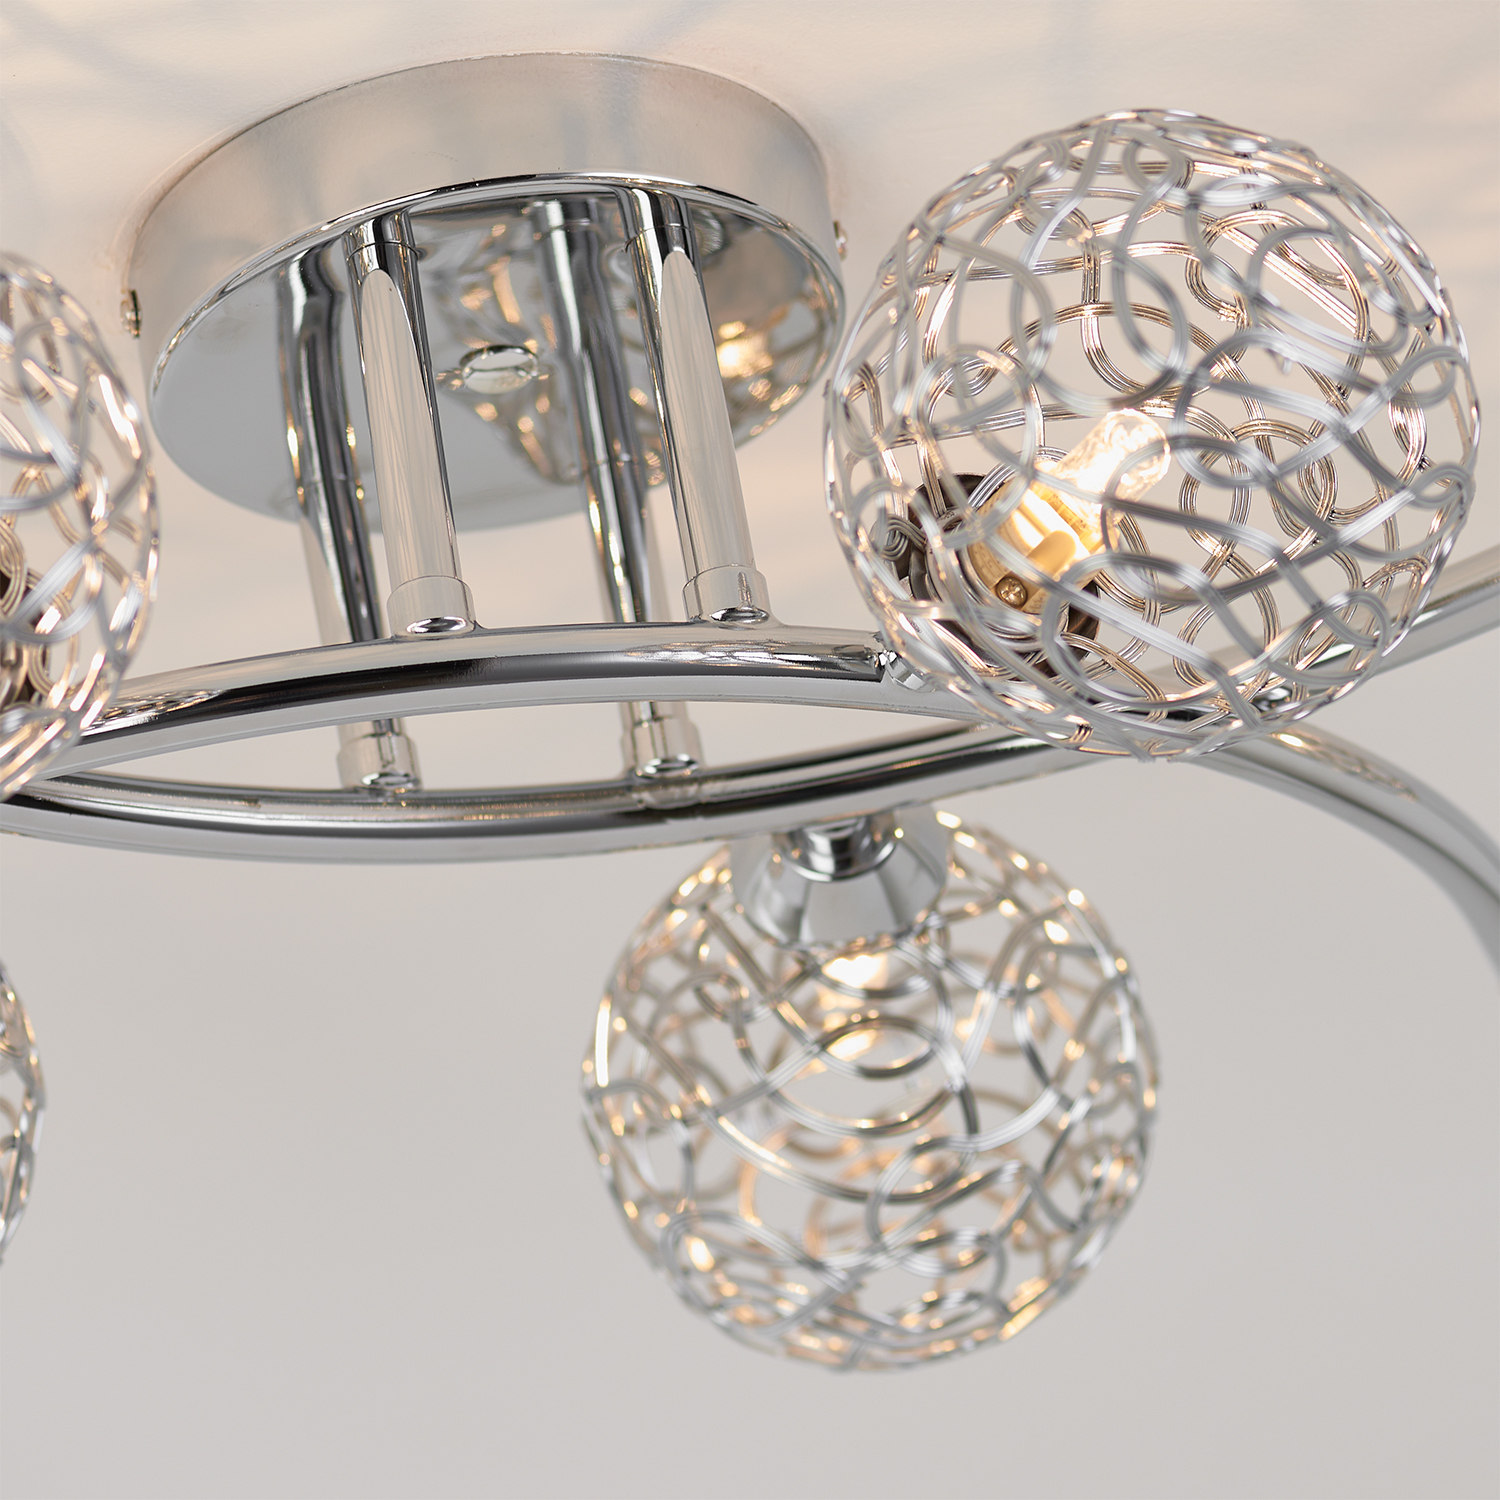 Silver 5 Sphere Electrical Fitting Ceiling Light Image 4